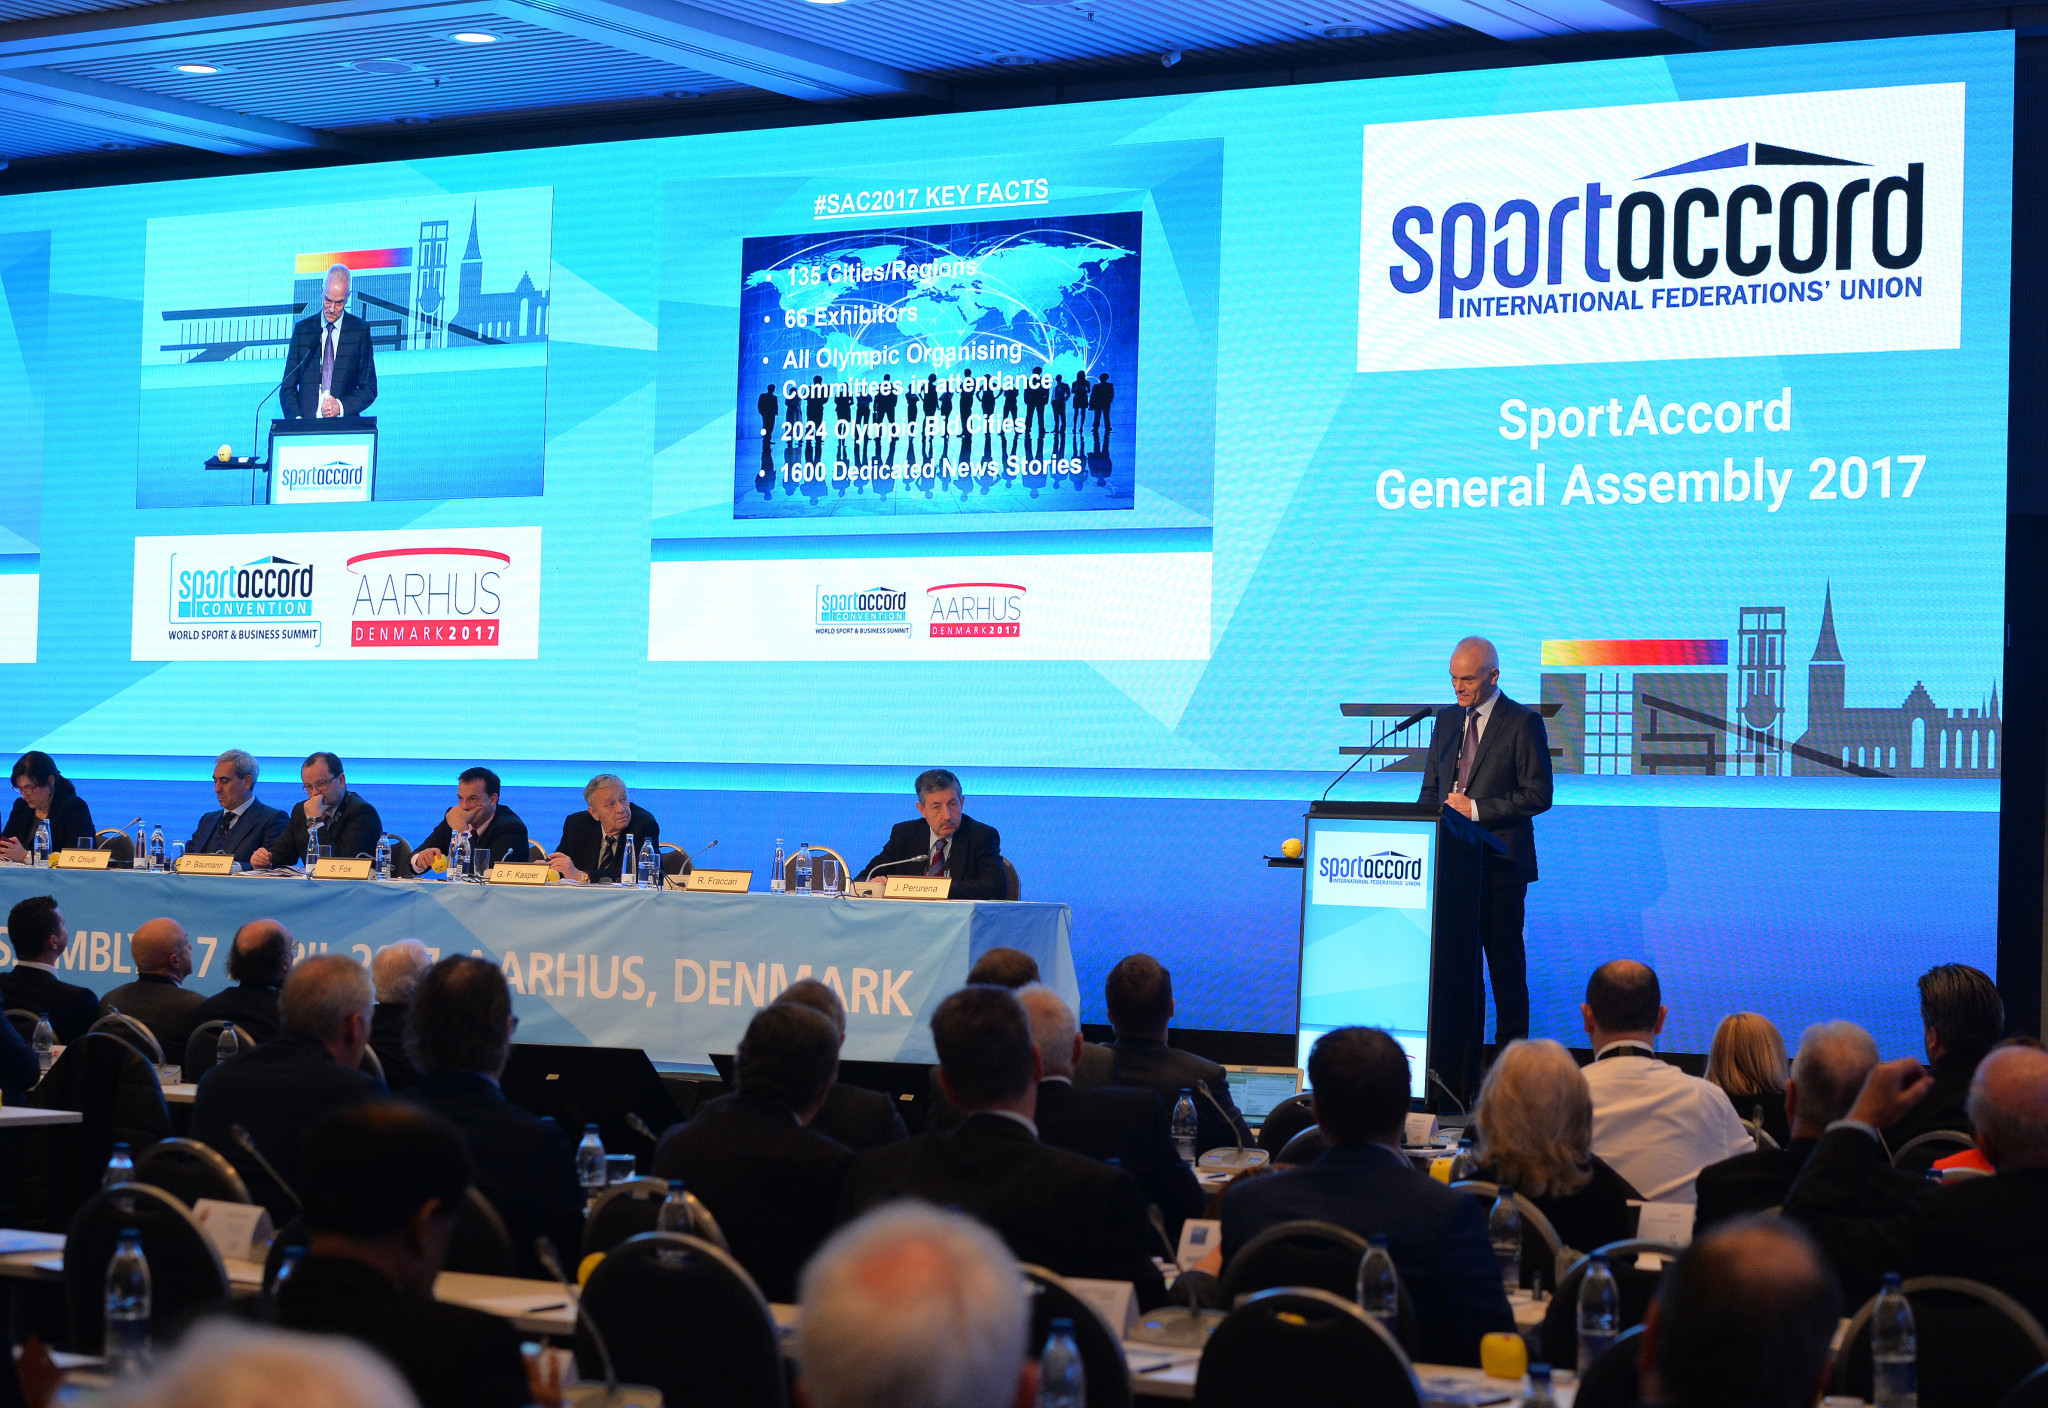 A delegation are expected to visit next year's SportAccord Convention to try to attract Championships to Gold Coast ©Getty Images